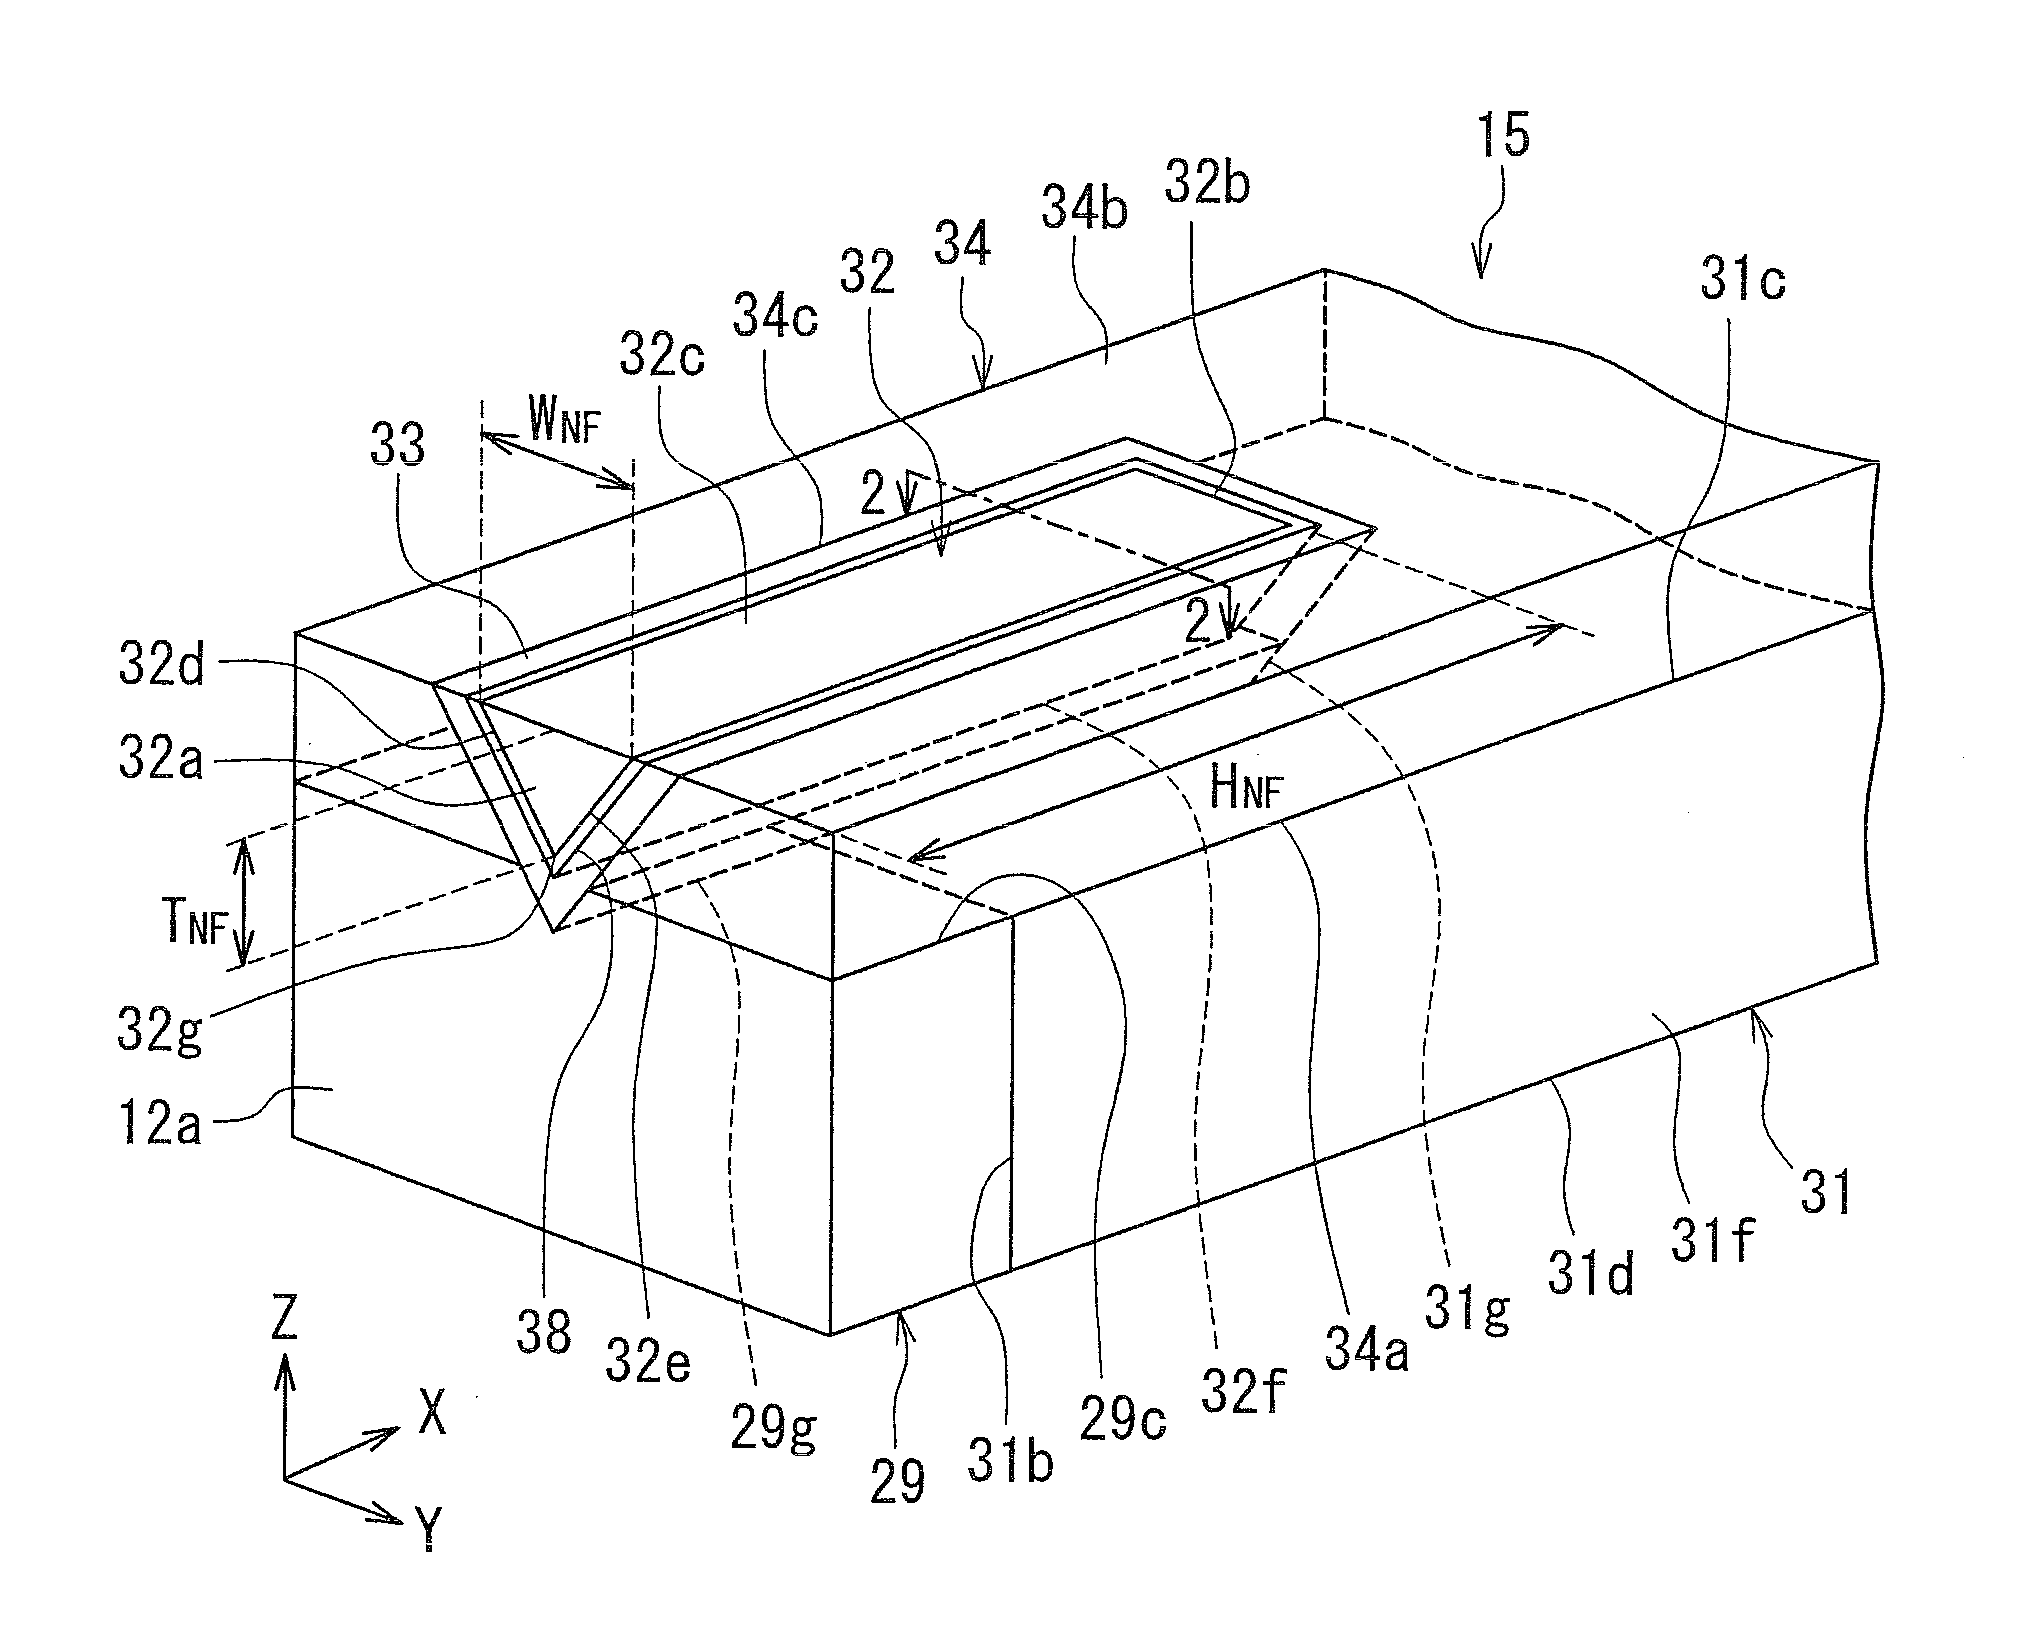 Near-field light generating device including near-field light generating element disposed over waveguide with buffer layer and adhesion layer therebetween